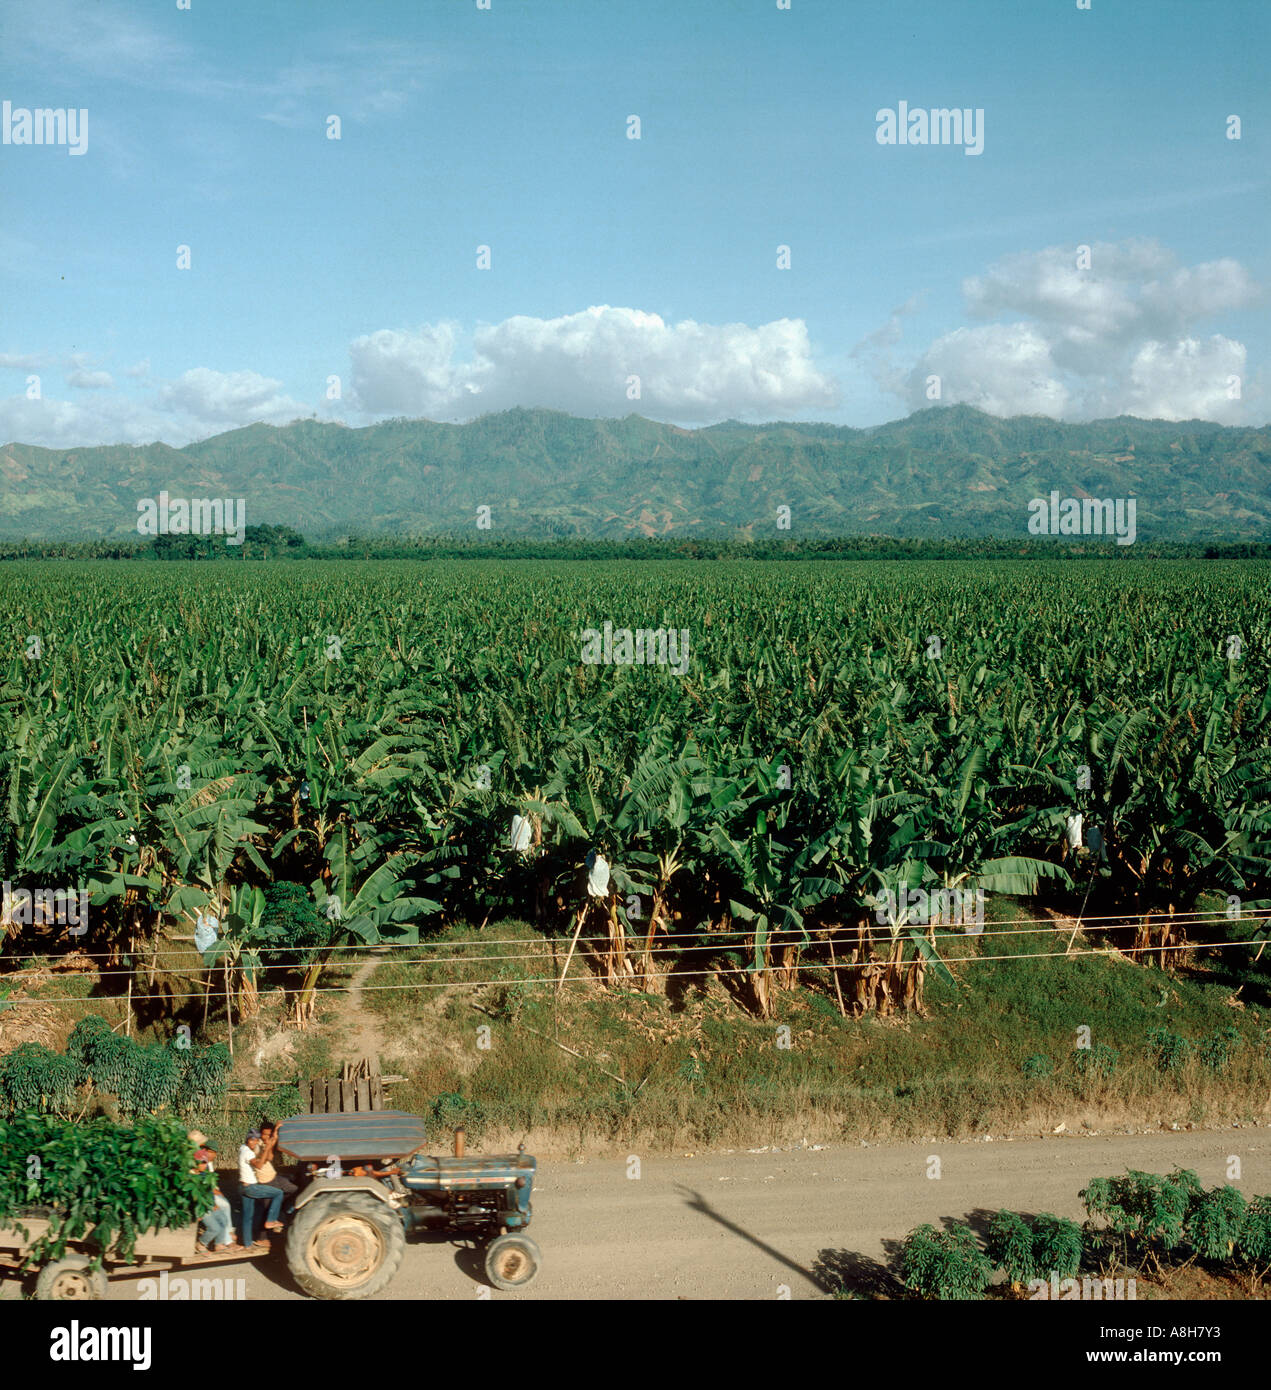 Overview of Filipino banana plantation in Mindanao with a tractor driving by on a dirt road Stock Photo